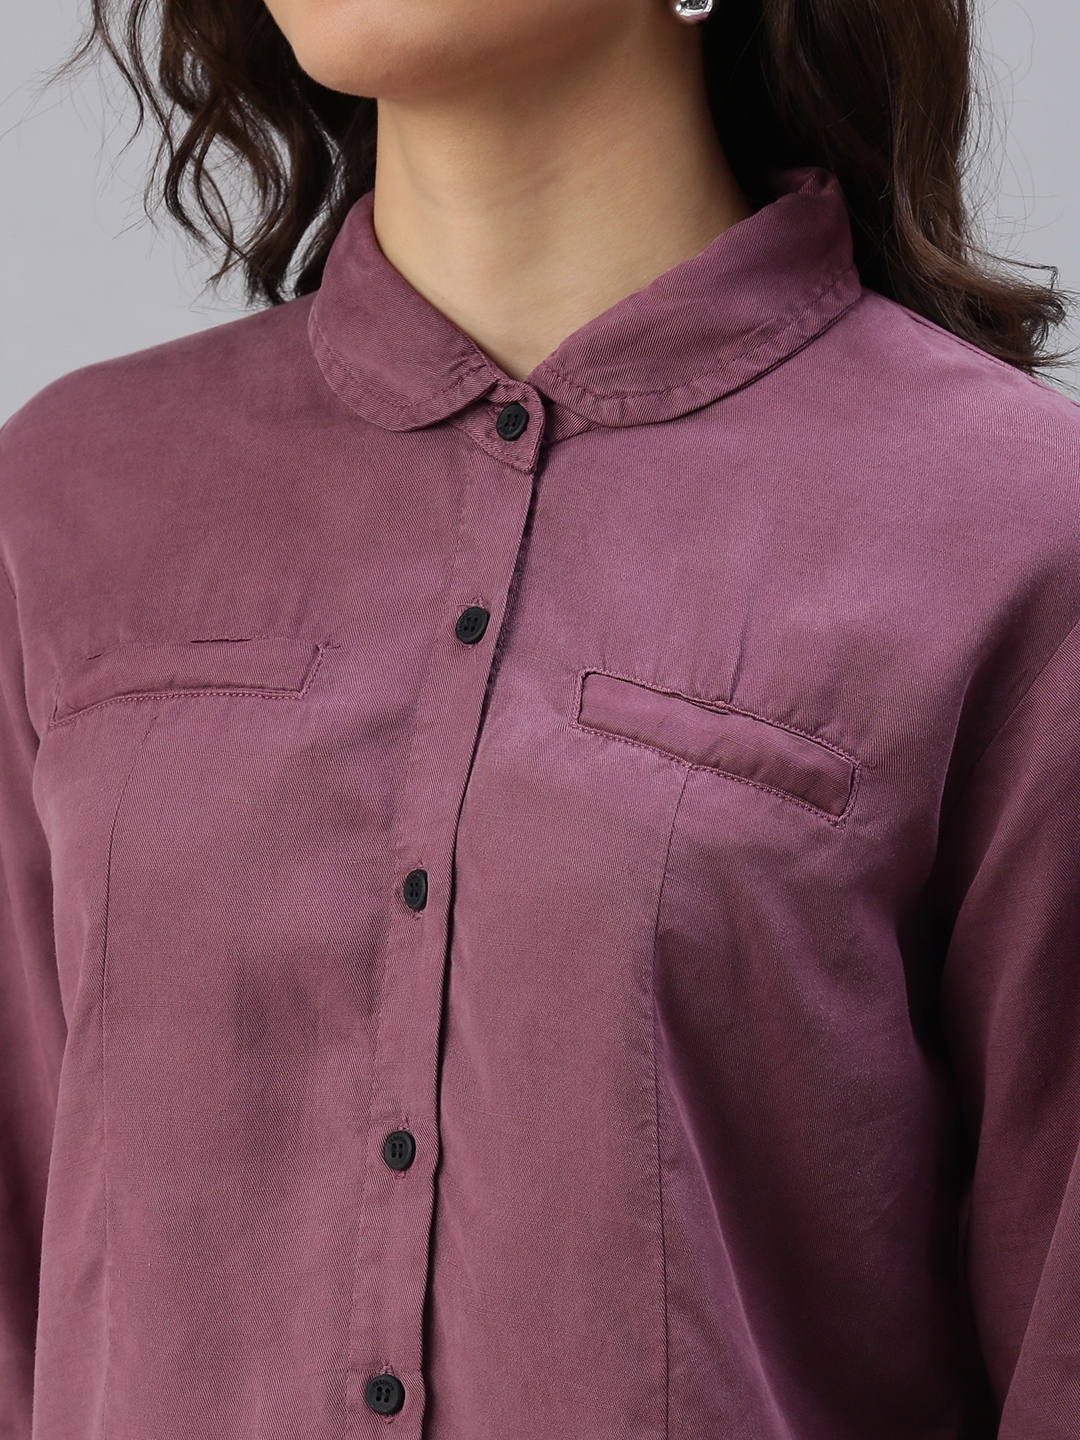 Women's Grey Cotton Solid Casual Shirts